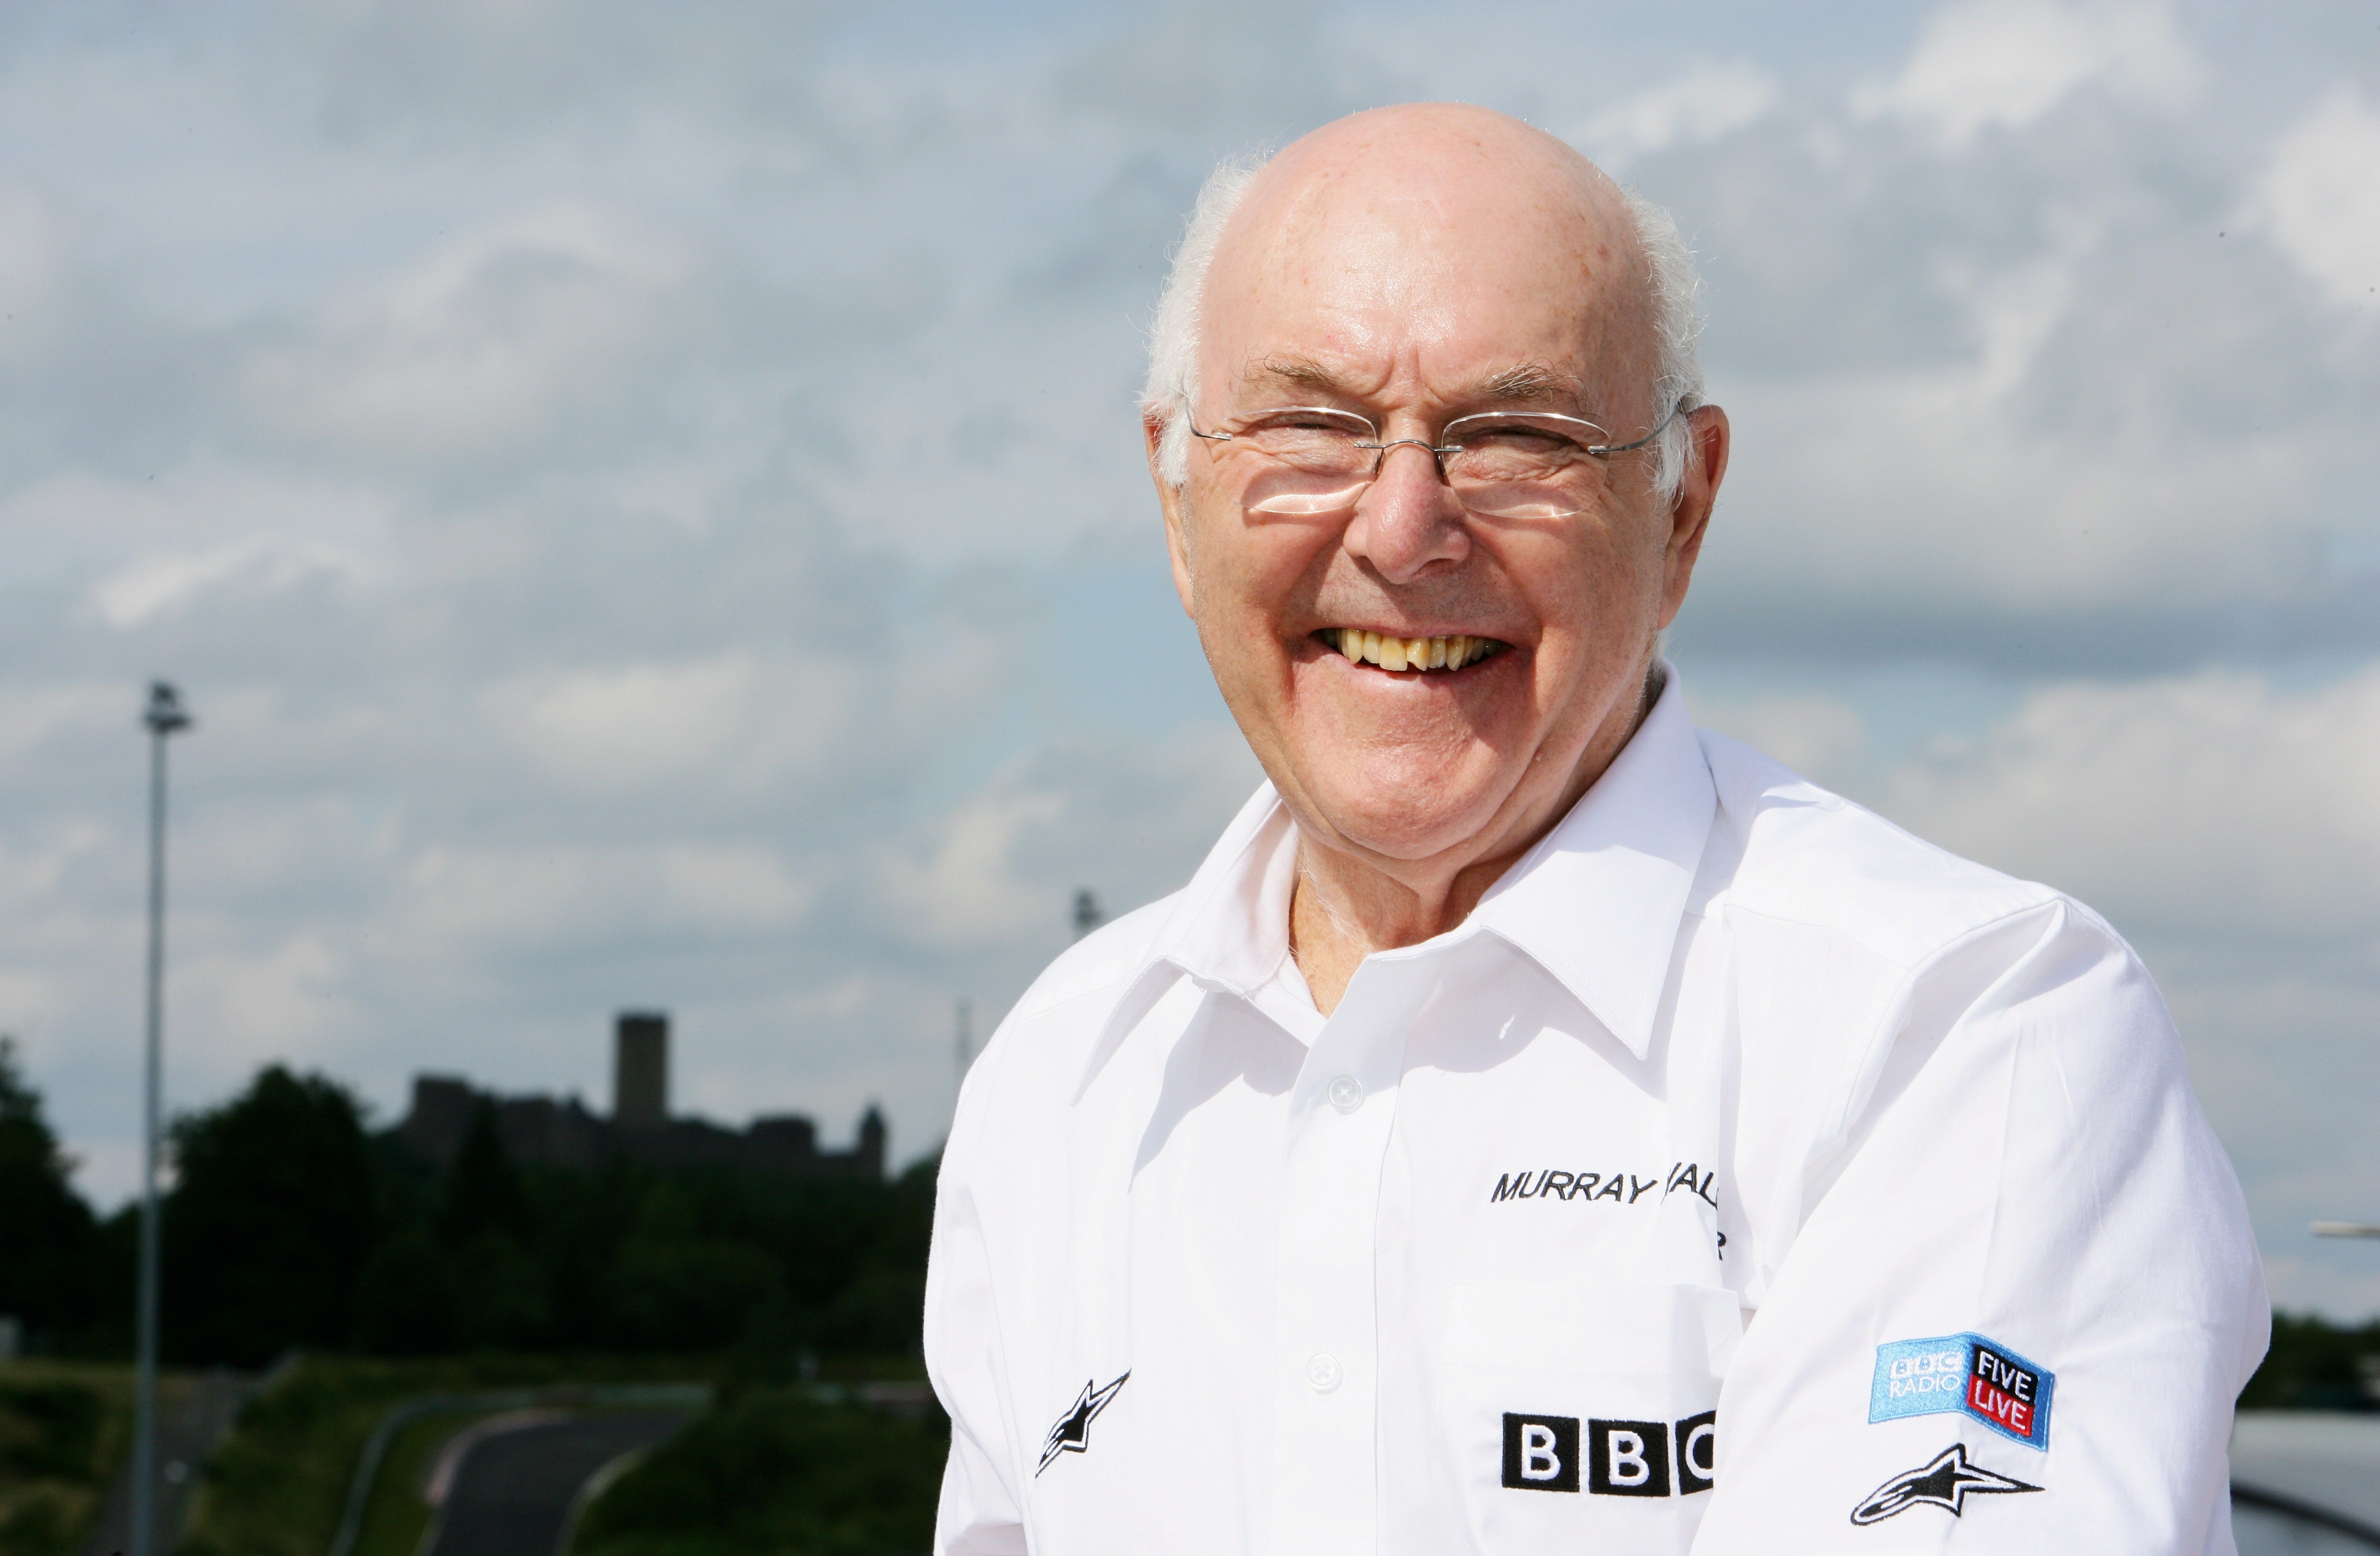 Formula One commentator Murray Walker poses during practice for the European Grand Prix at Nurburgring